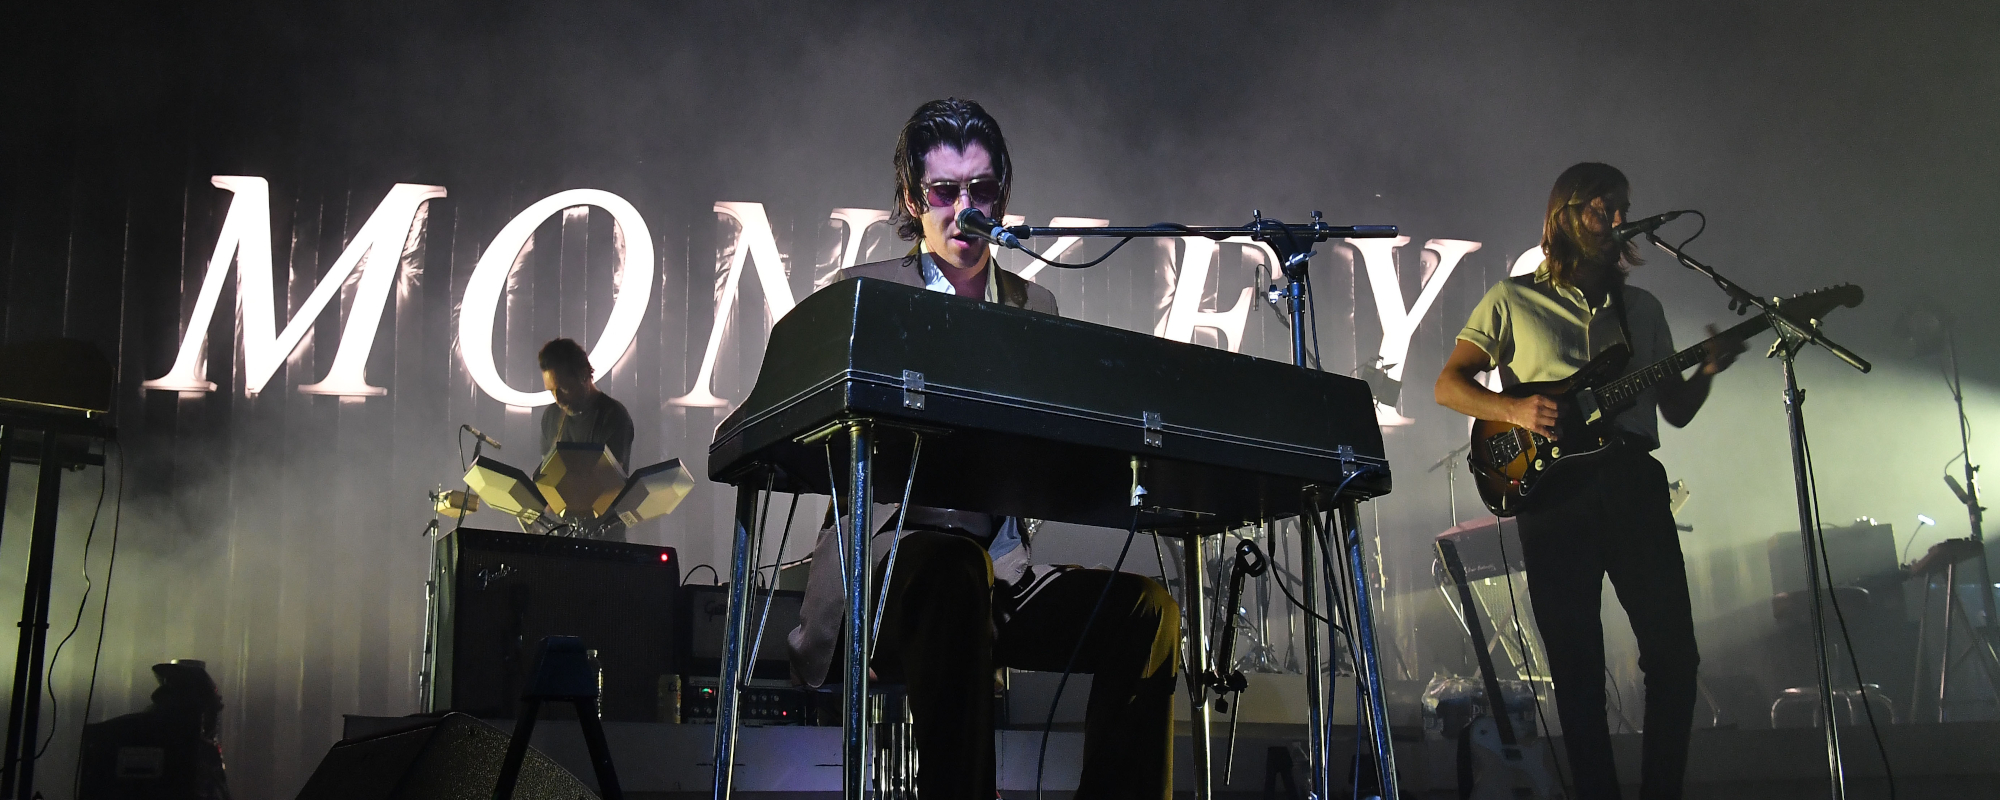 Arctic Monkeys Perform “A Certain Romance” for the First Time in a Decade